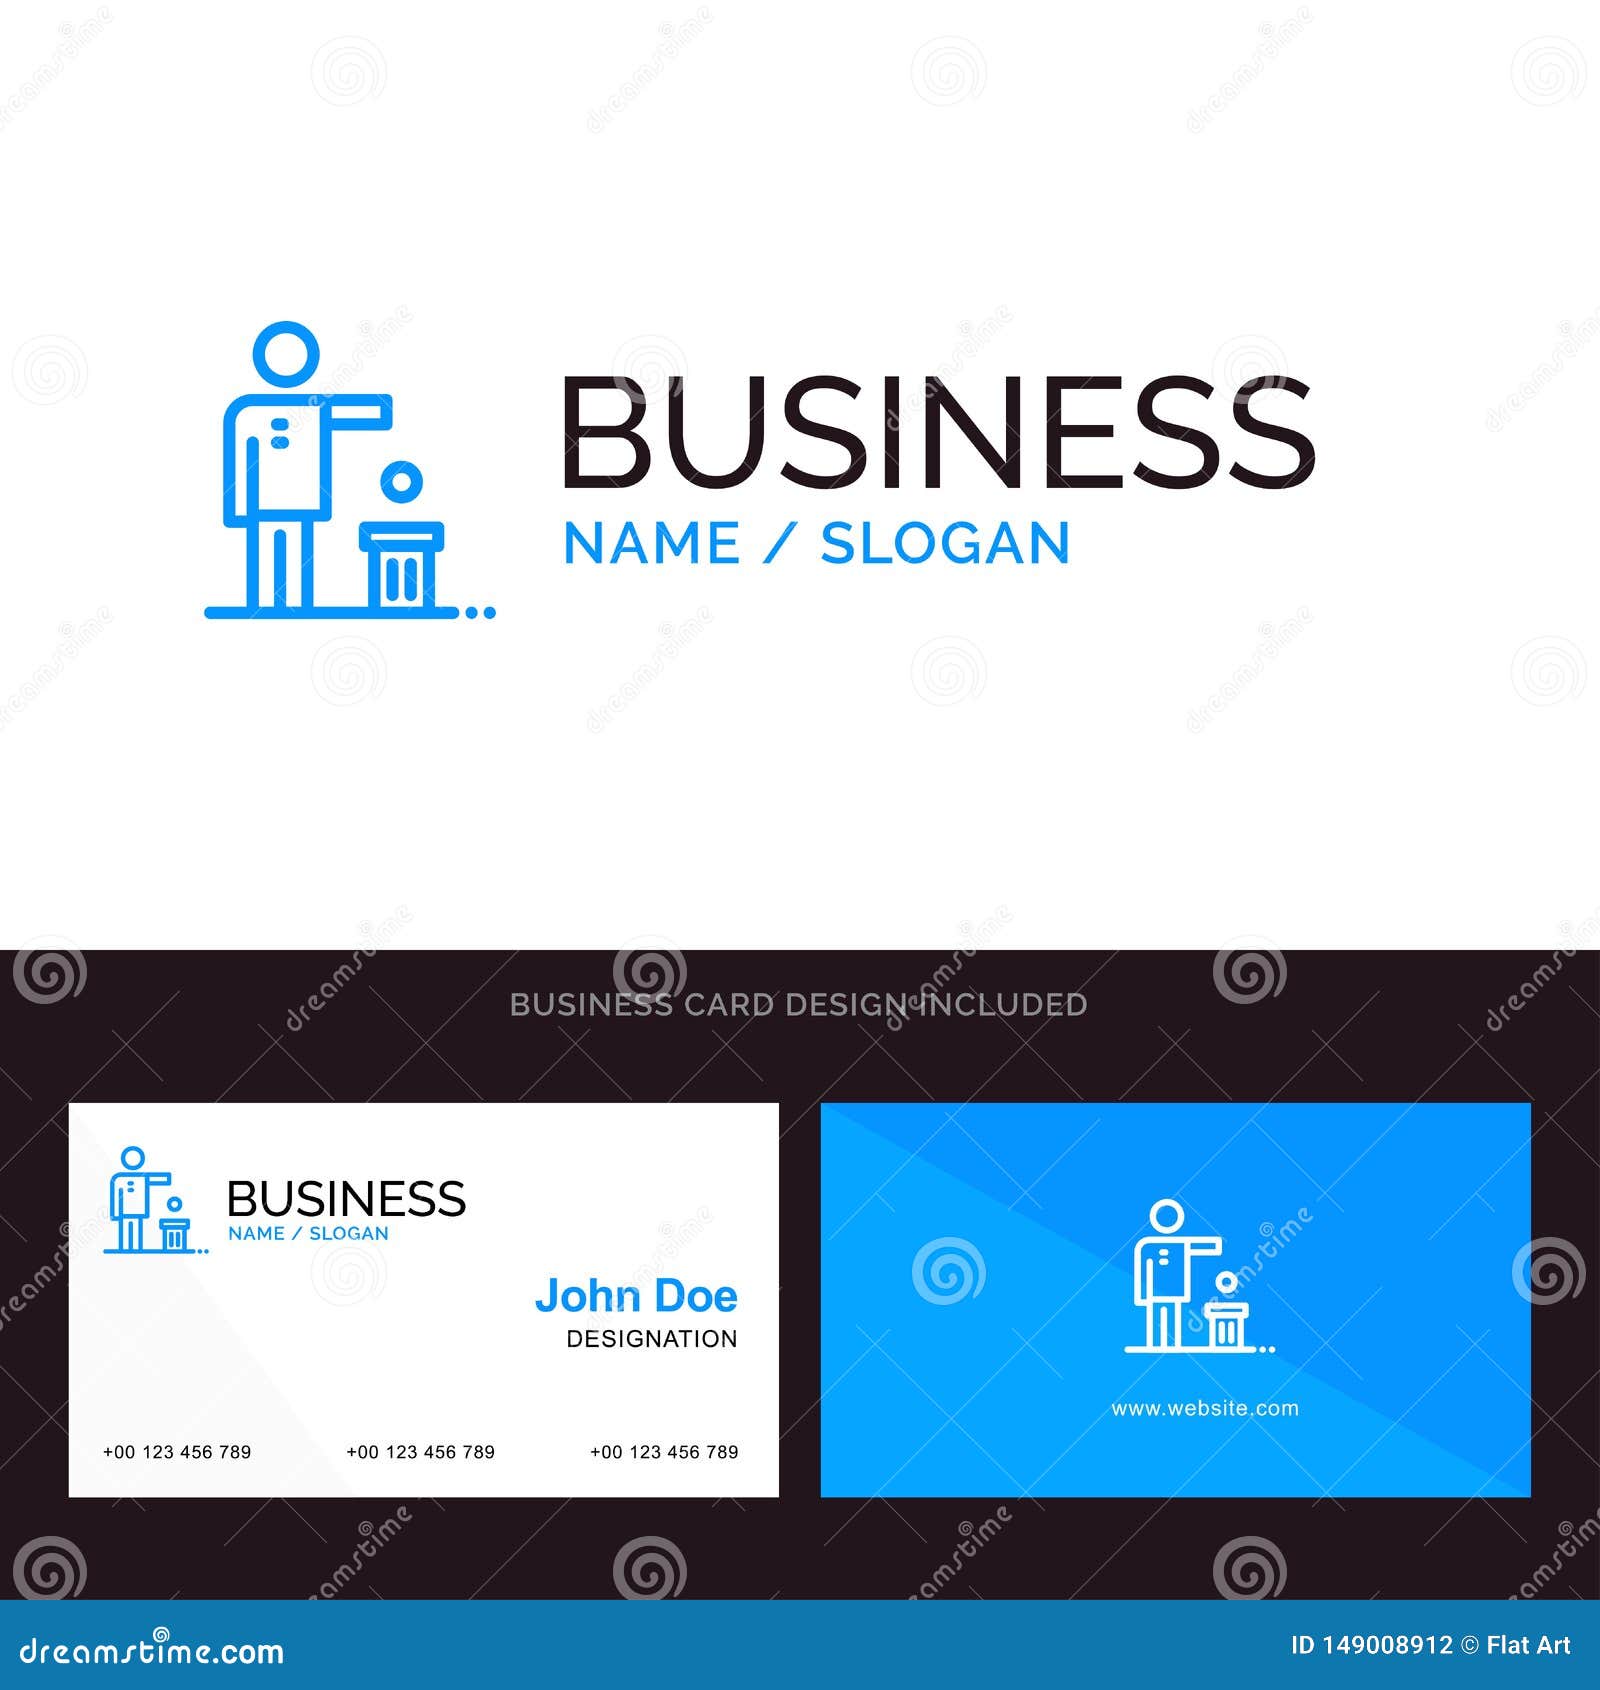 recycling business cards ideas 6